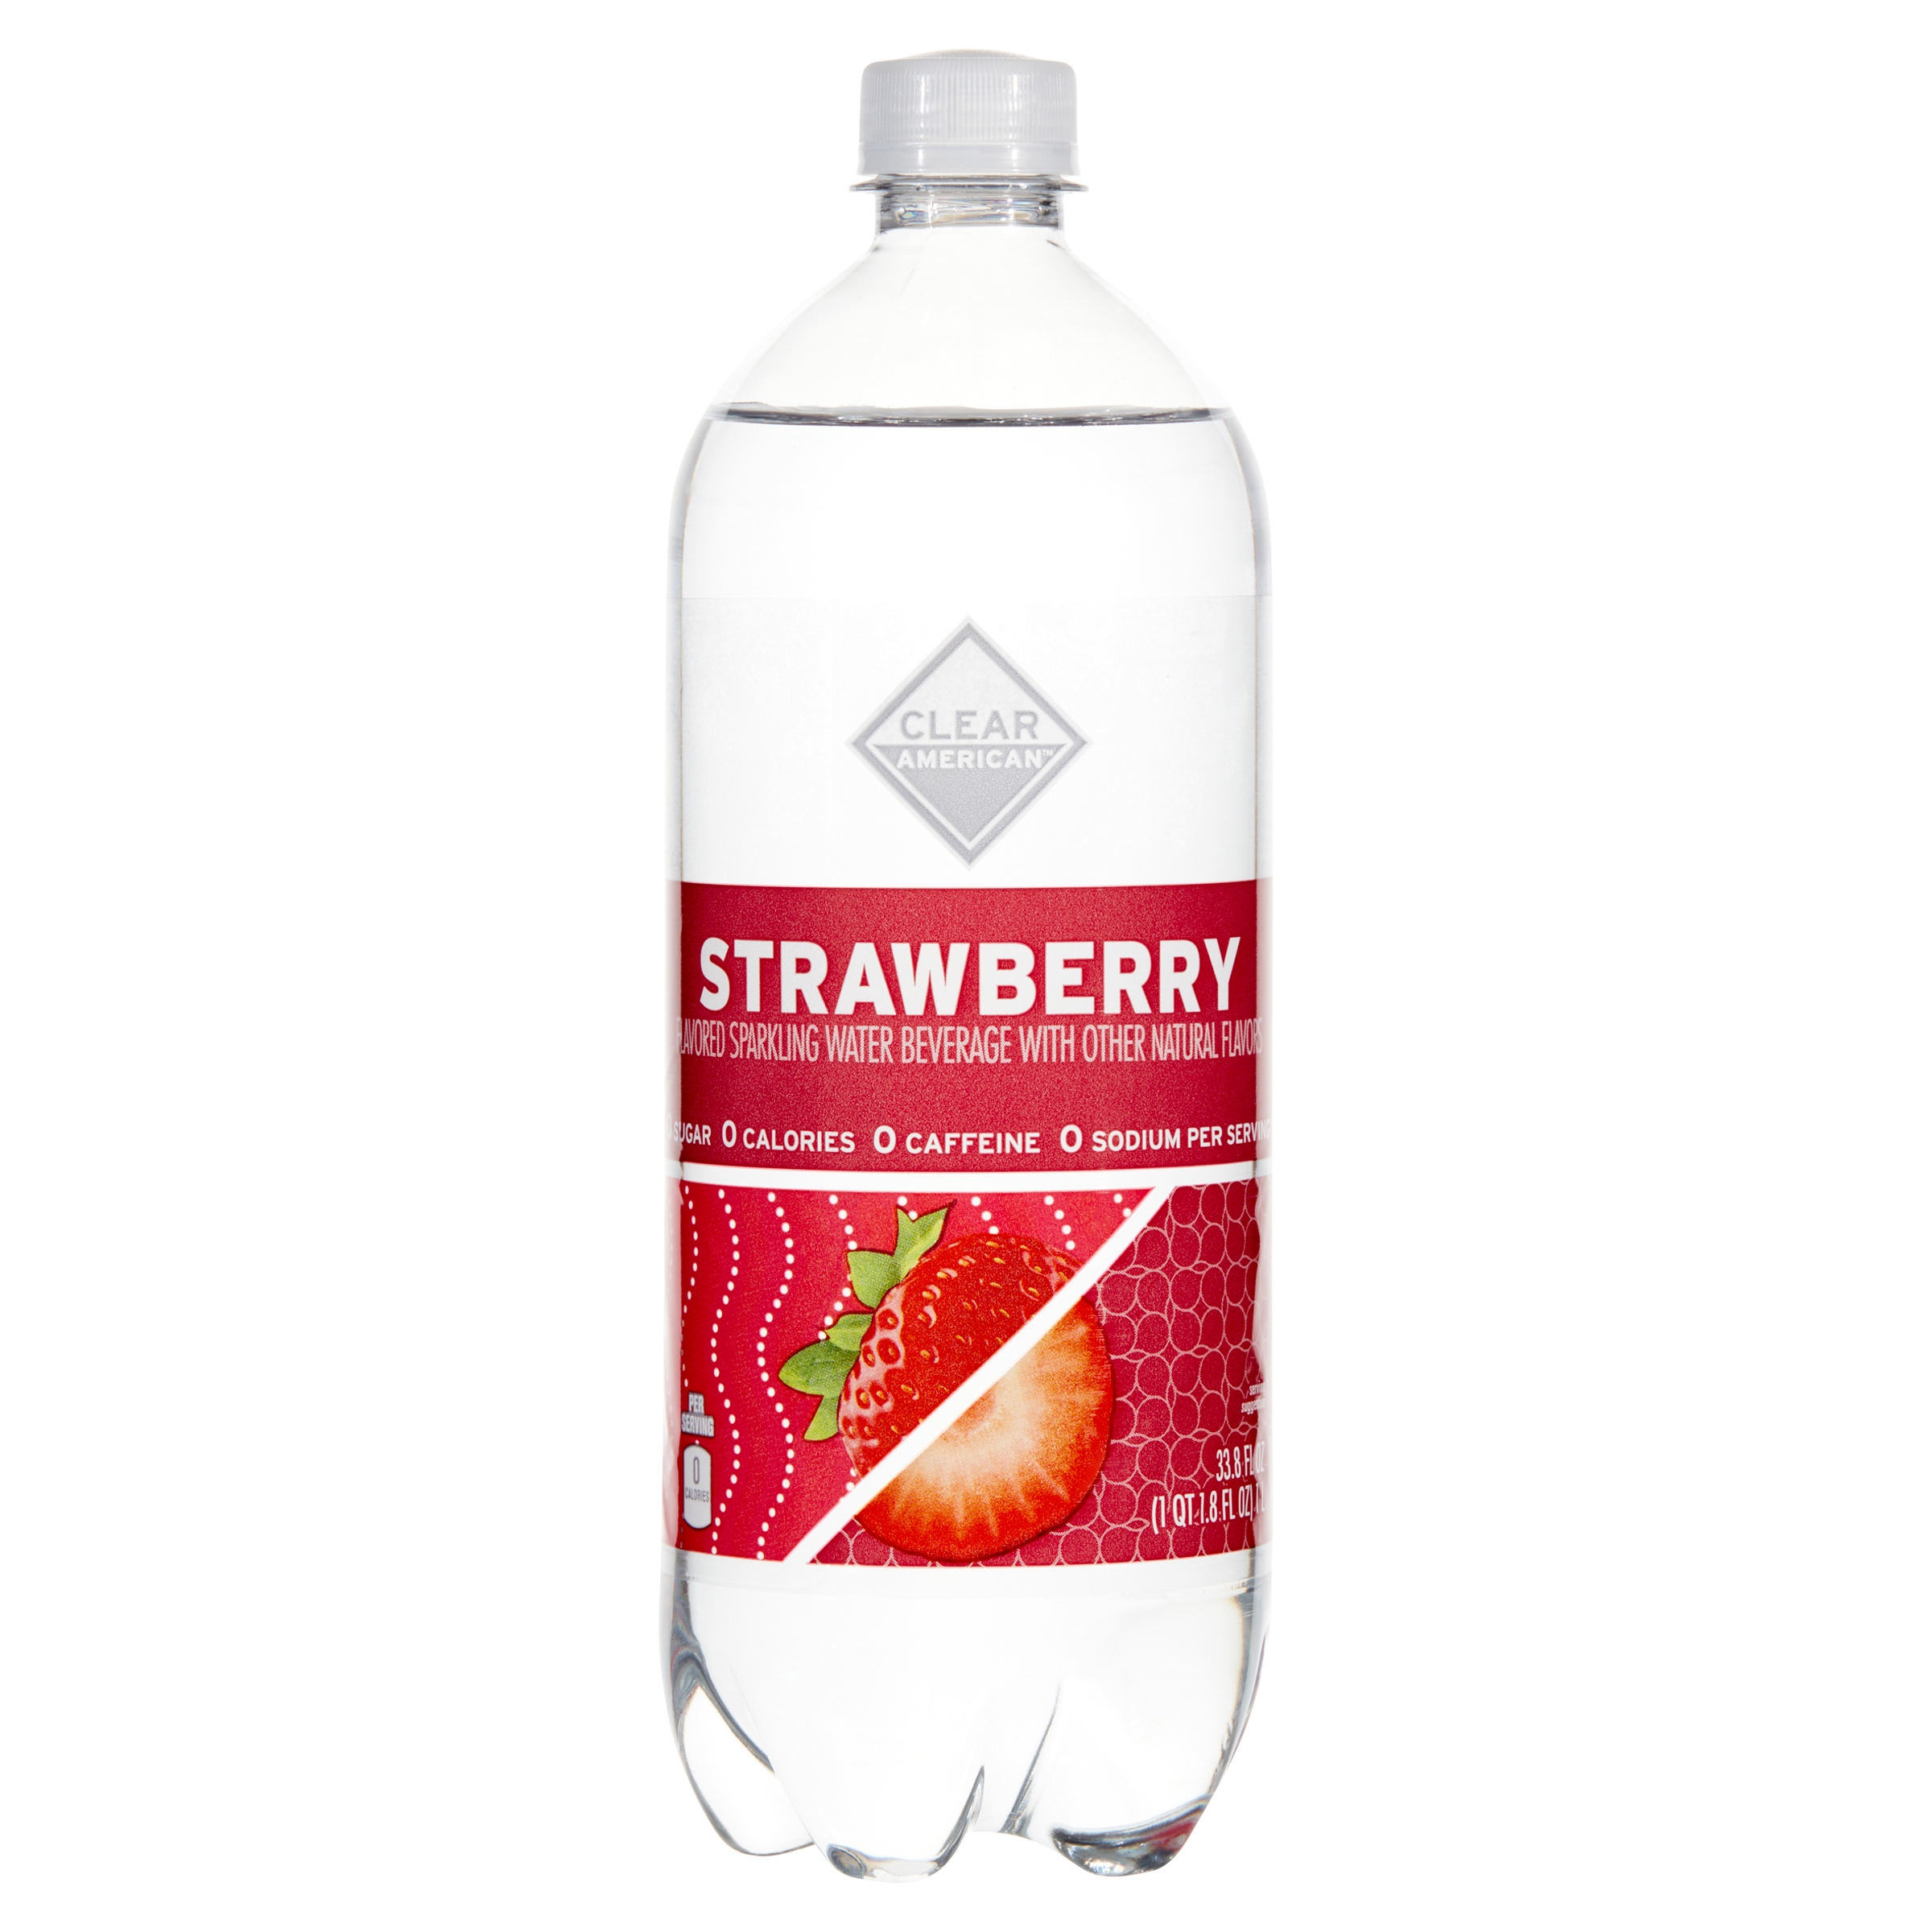 Clear American Sparkling Water, Strawberry, 33.8 fl oz - image 1 of 7